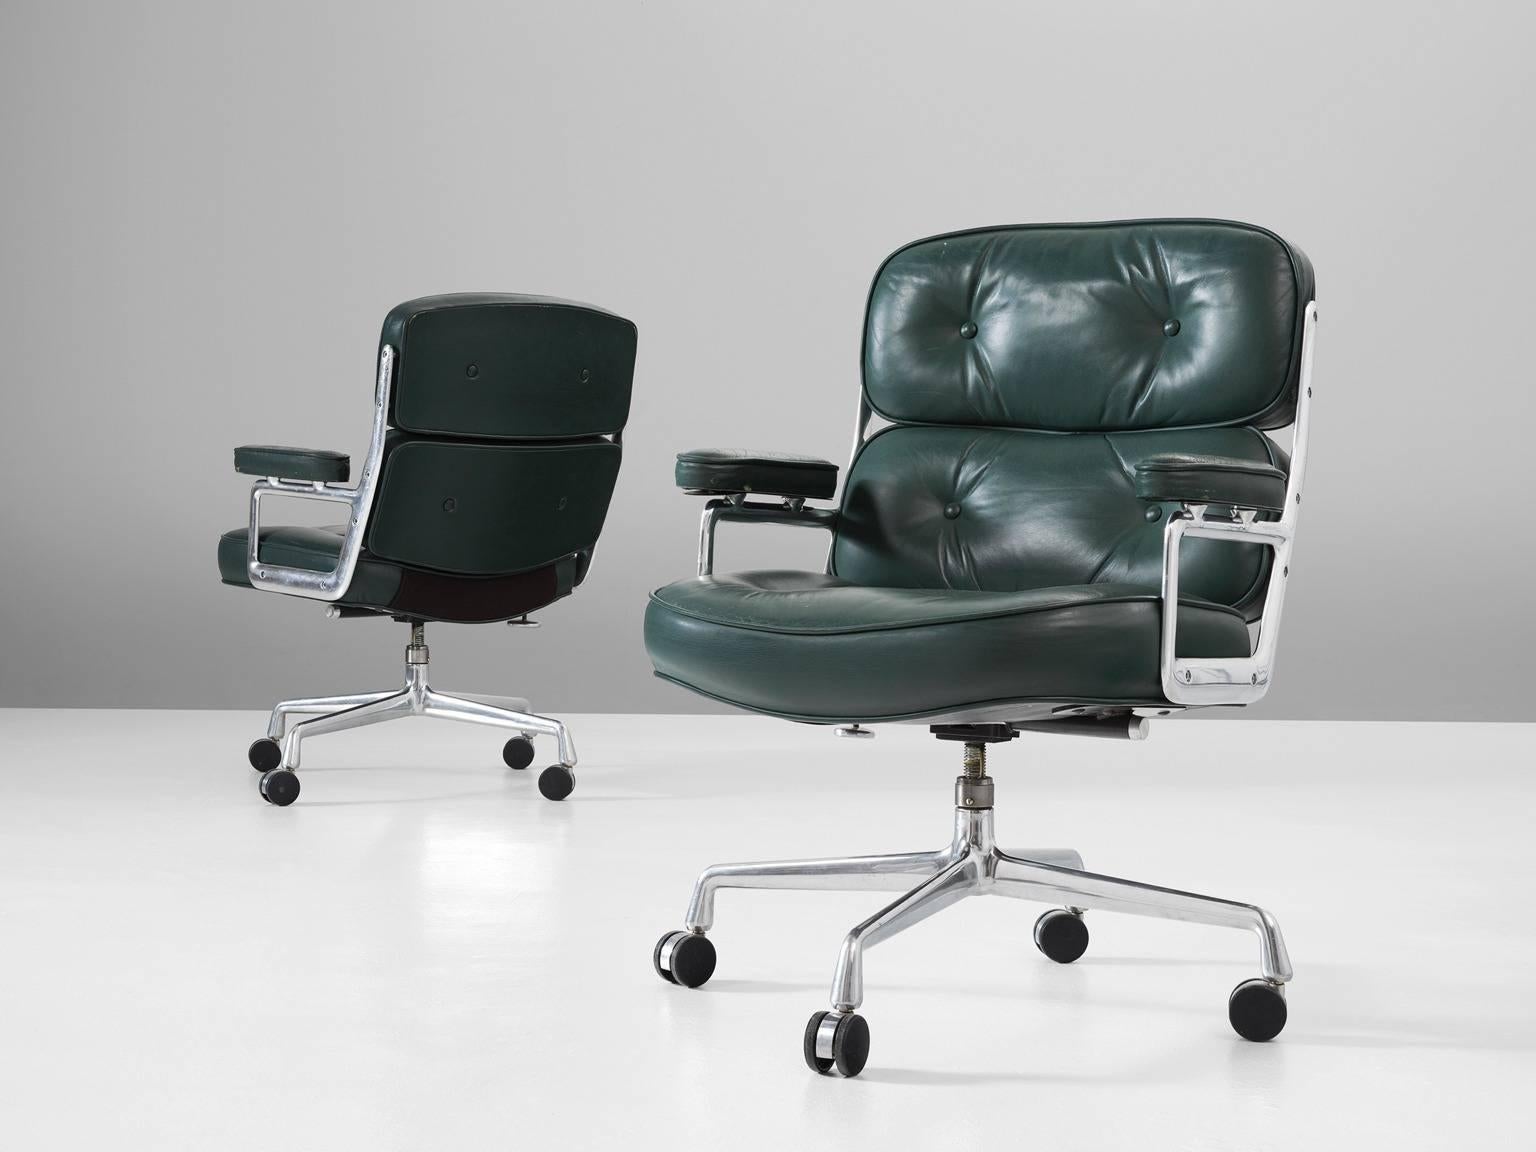 Set of two desk chairs, in leather and metal, by Charles & Ray Eames, United States, 1960.

Classic office chairs by designer couple Charles & Ray Eames. These conference chairs were designed for the Time Life building in New York. A Classic